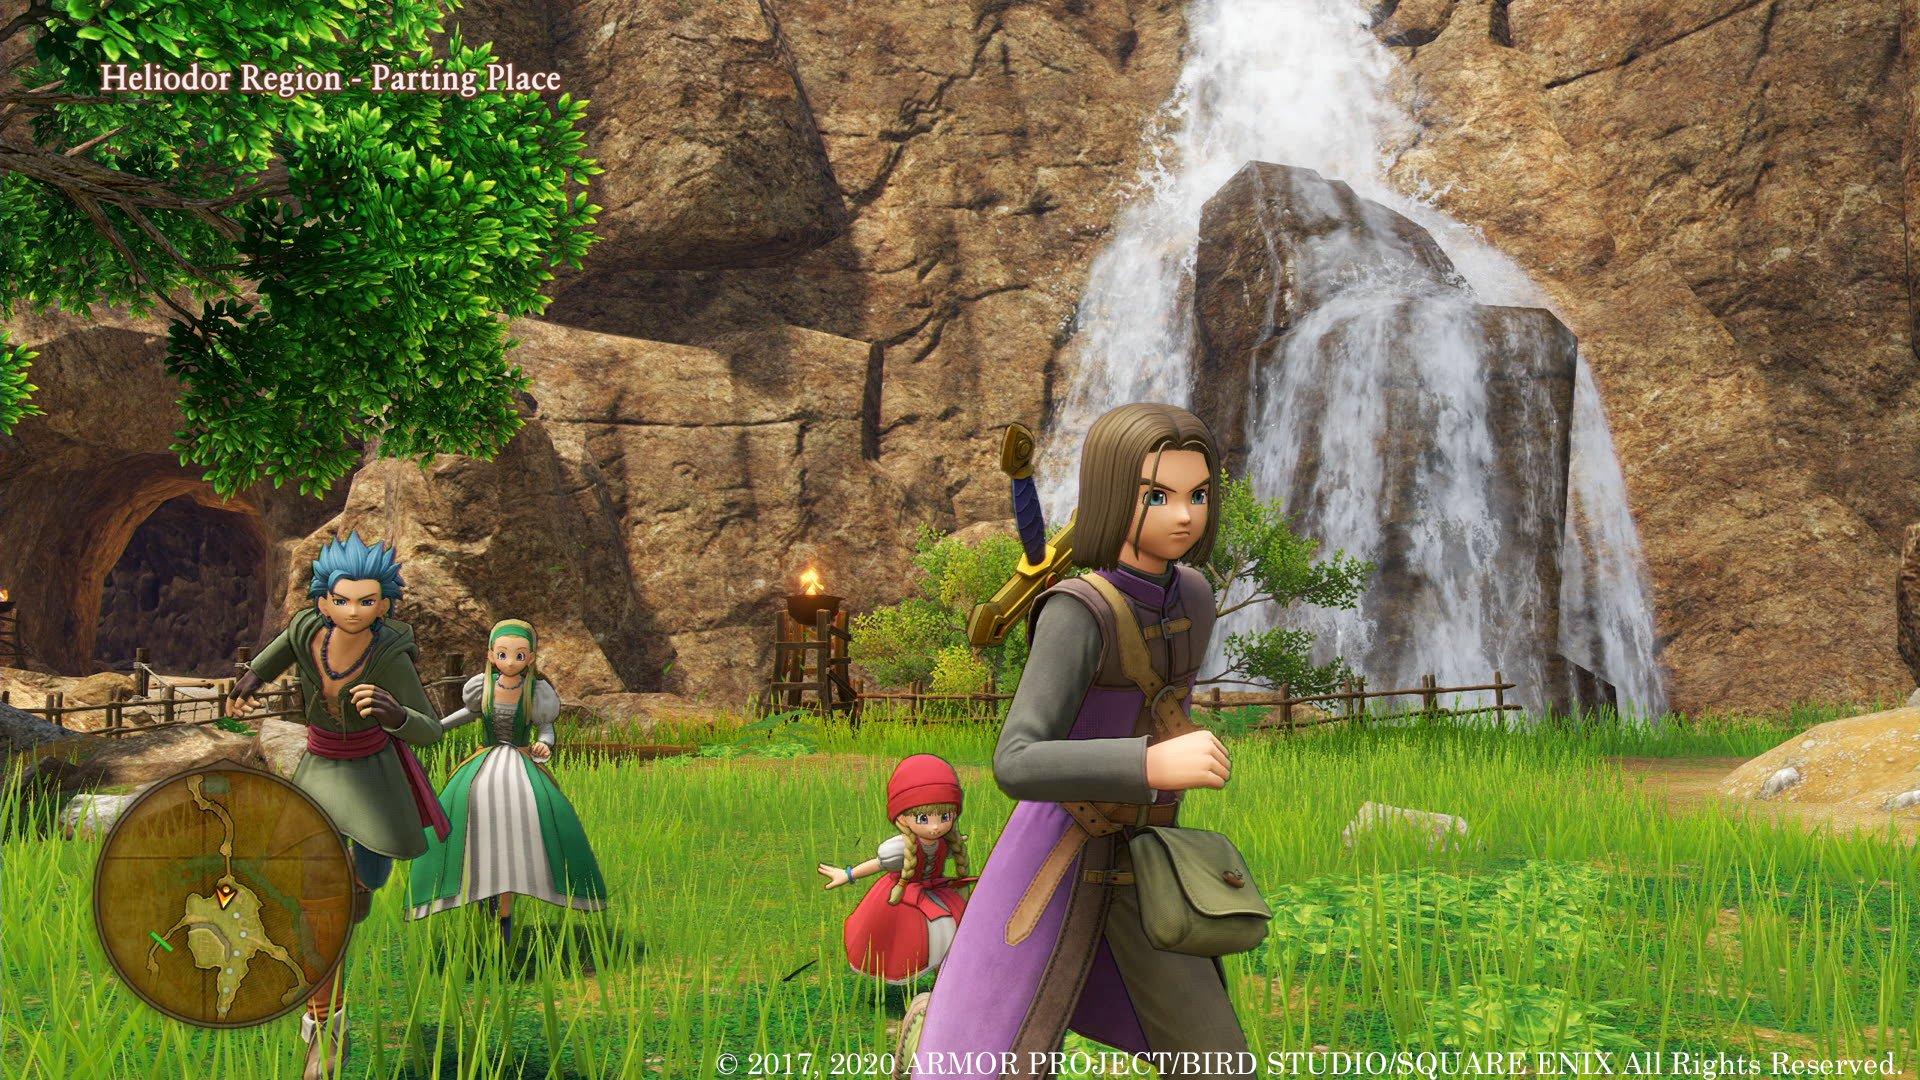 Dragon Quest XI S: Echoes of an Elusive Age - Definitive Edition, Nintendo  Switch, [Physical], 886162372694 